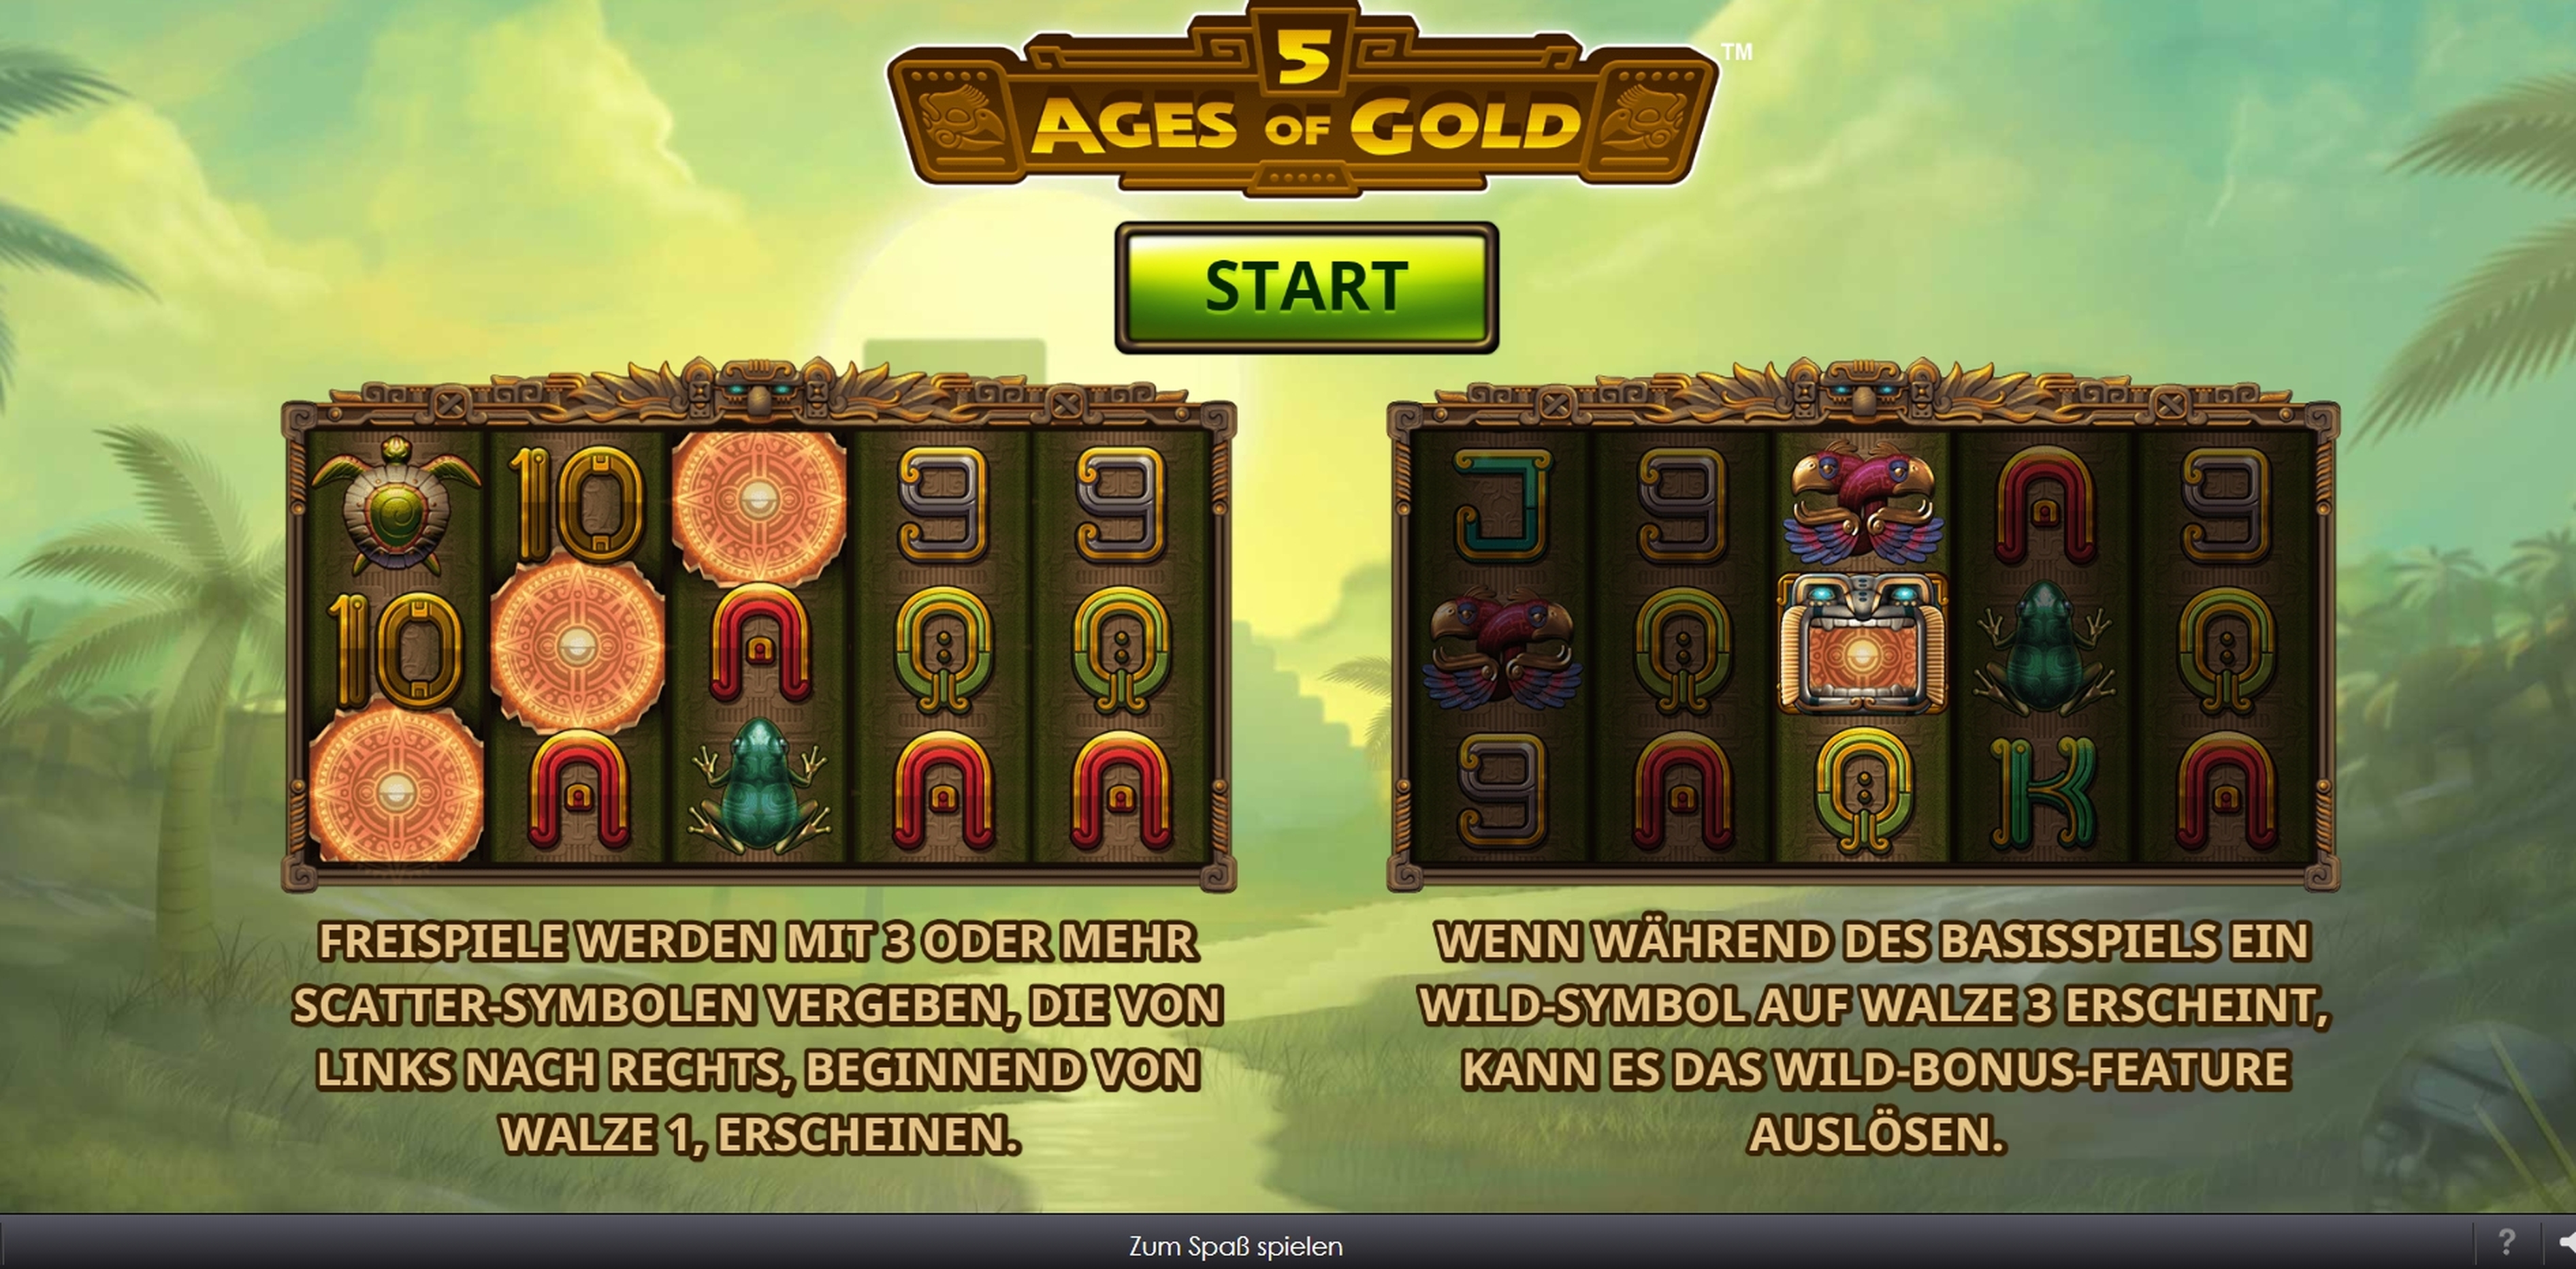 Play 5 Ages of Gold Free Casino Slot Game by GECO Gaming